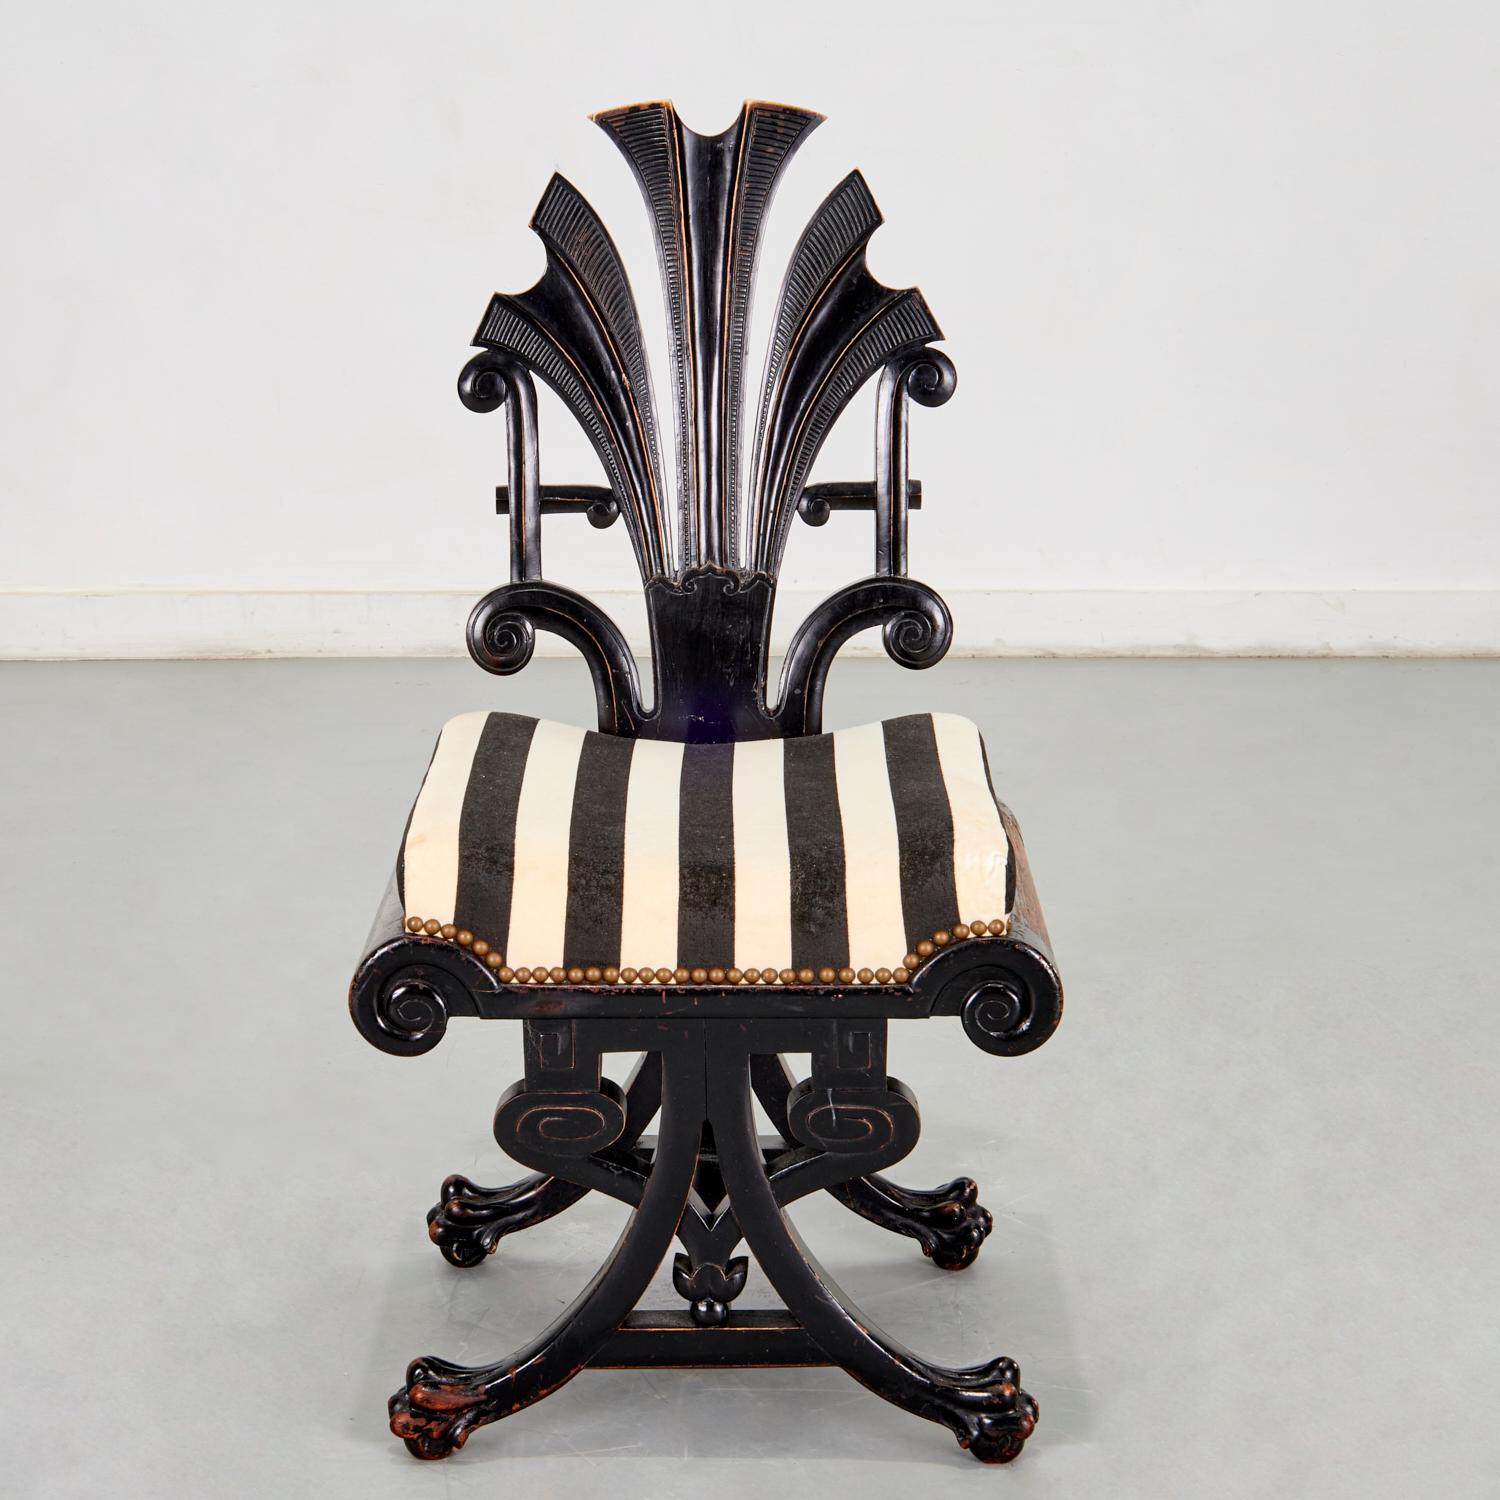 A very striking Antique English Aesthetic Movement black lacquered chair. The chair has an openwork wood back carved as a fan of stylized feathers over a padded seat upholstered in a black and white striped velvet with brass nailhead trim, over